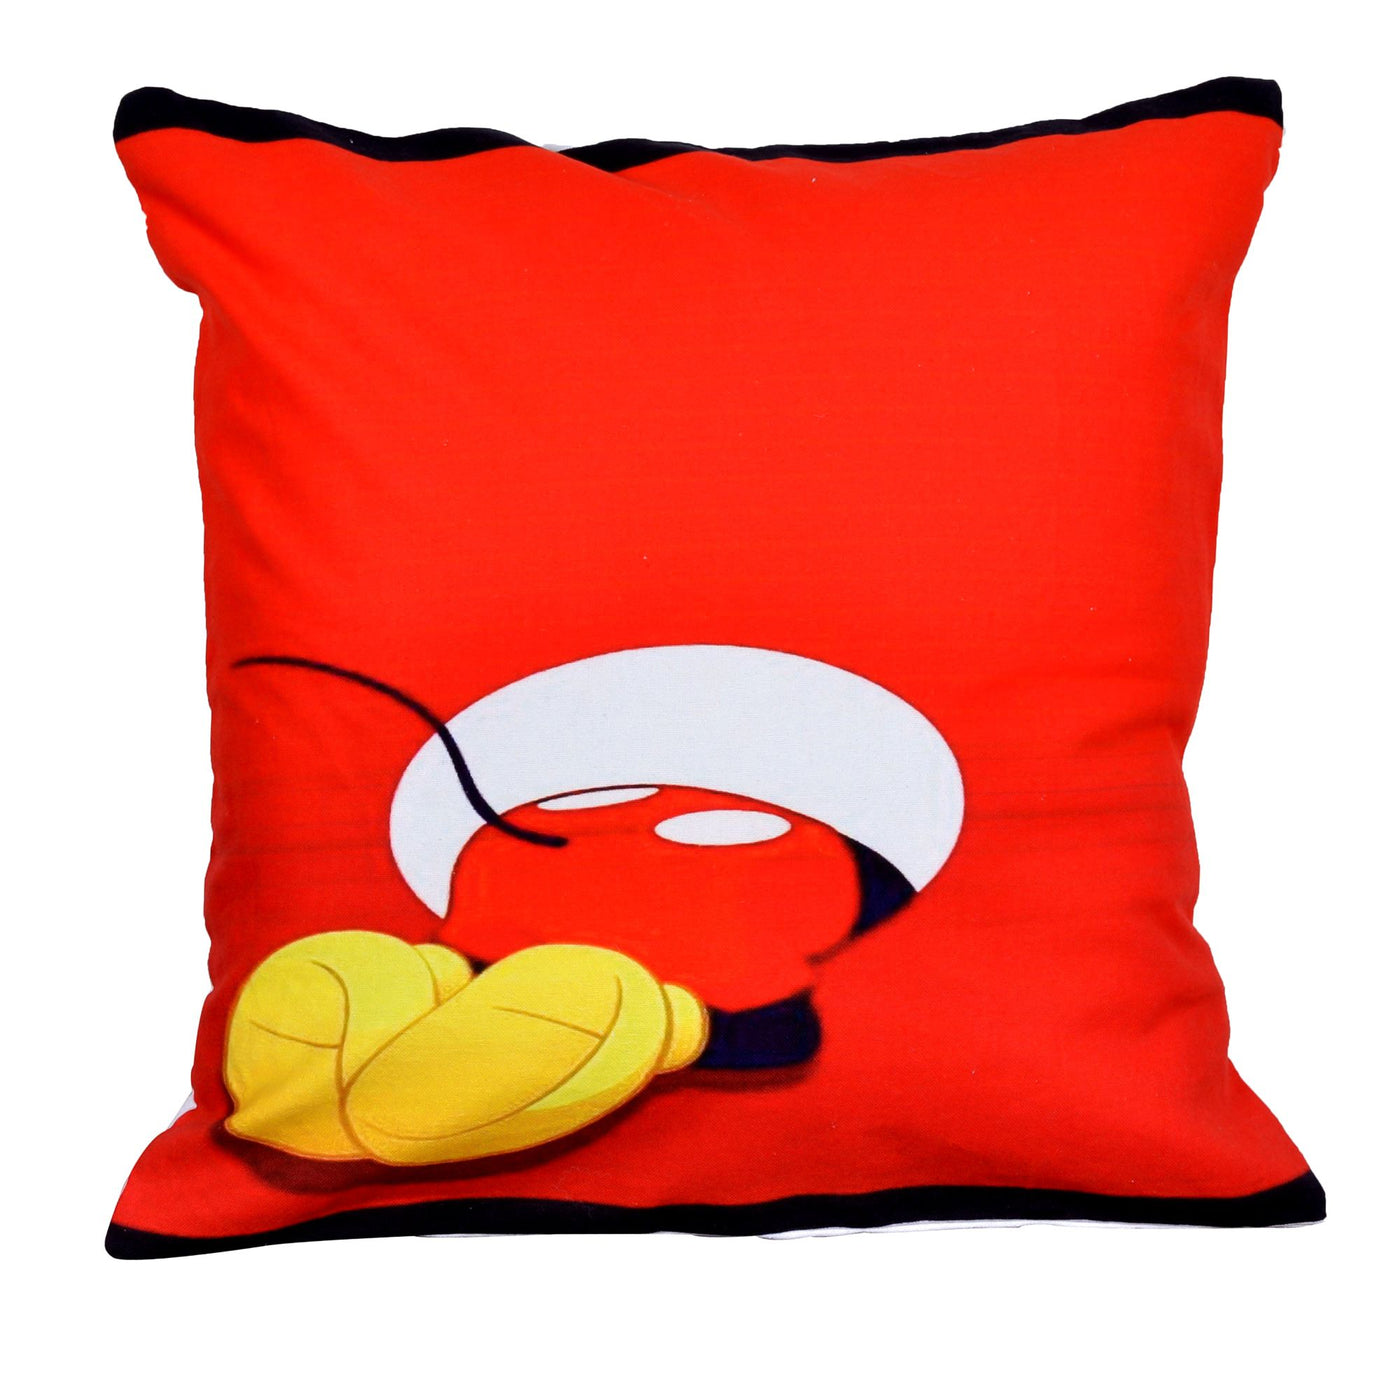 Mickey Mouse's Bum 16 Cushion Cover